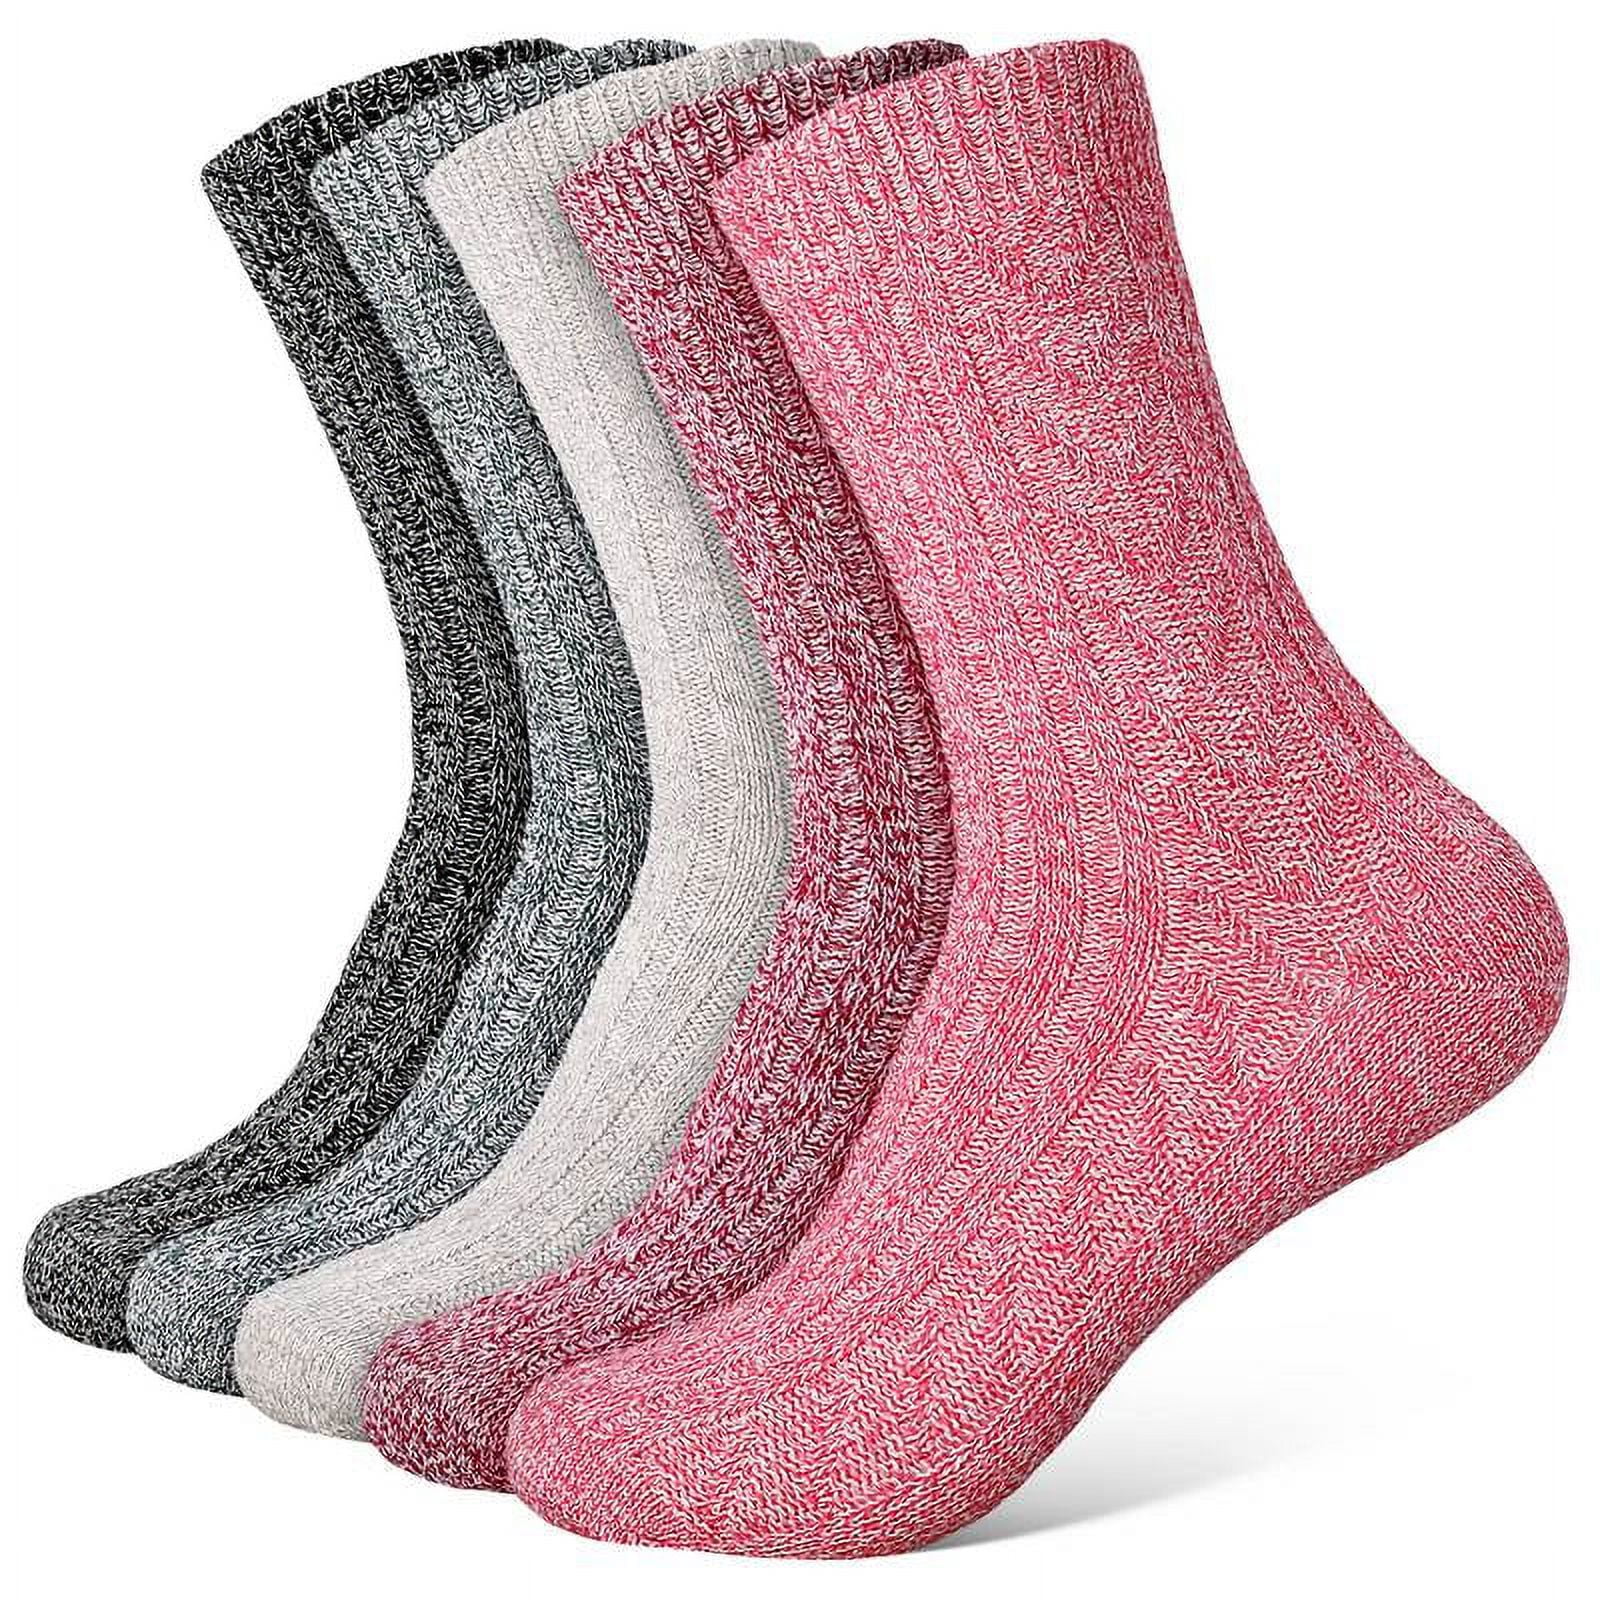 HEQUSIGNS 5 Pairs Thick Knit Winter Socks, Wool Socks for Women, Wool ...